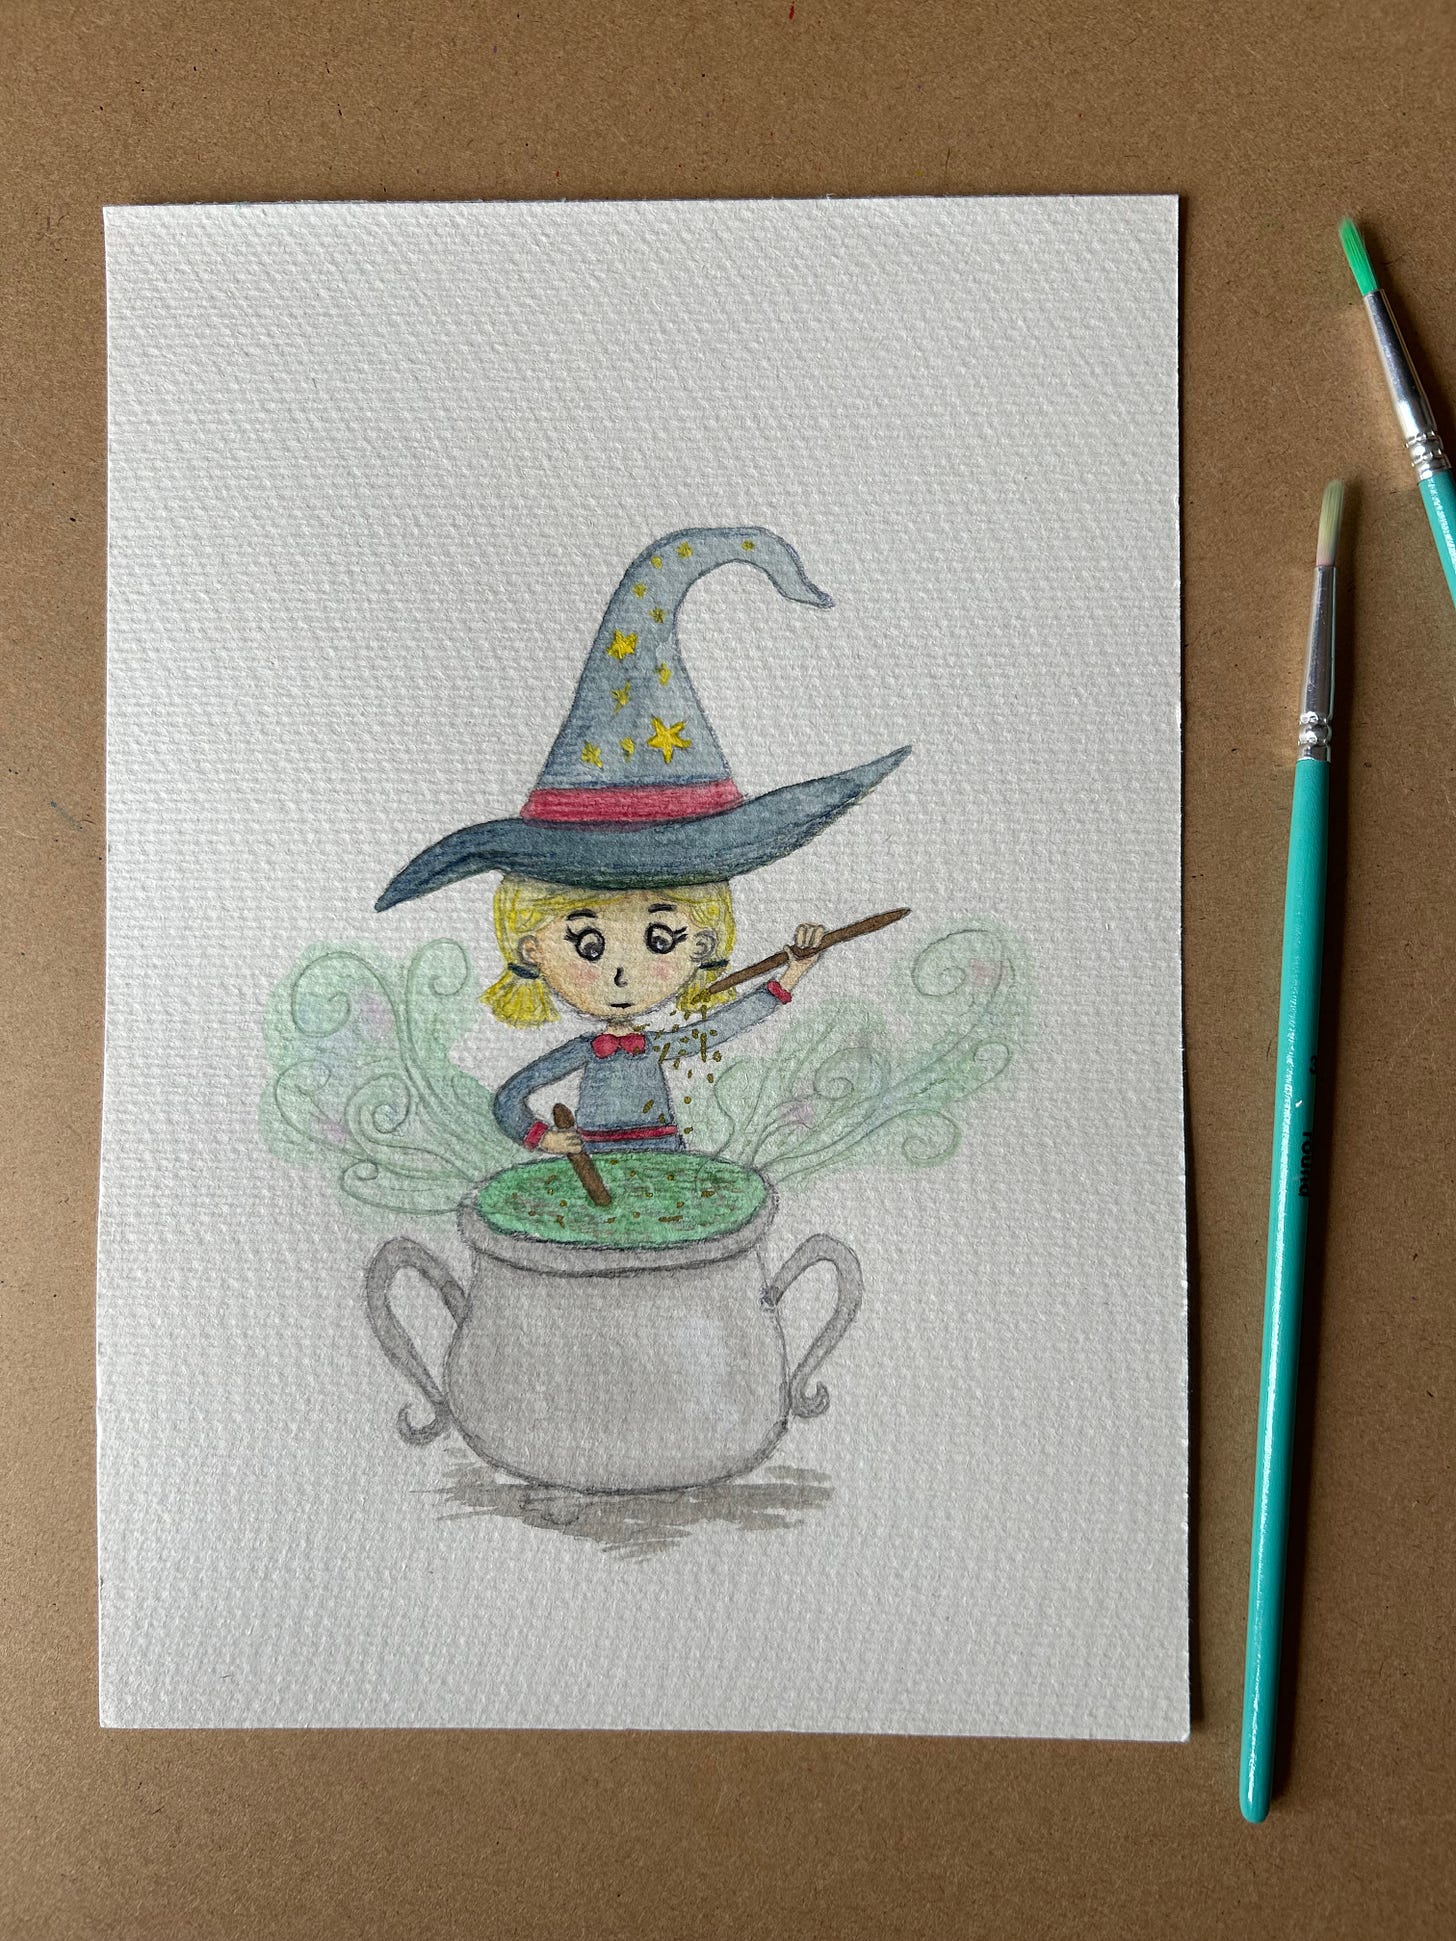 Illustration on watercolour paper featuring a young witch hovered over a cauldron as she mixes a concoction.